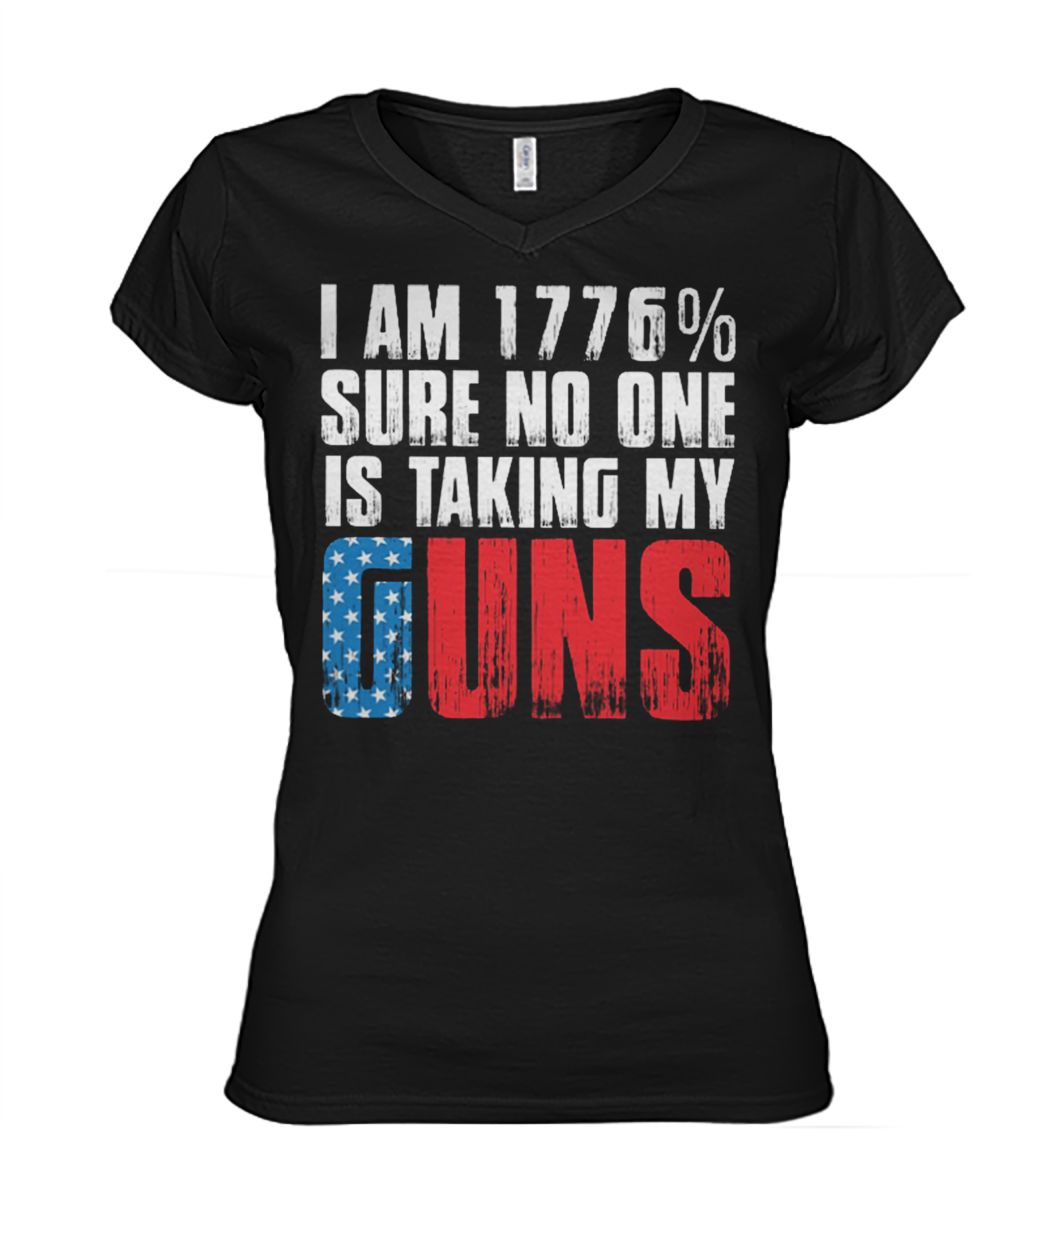 I am 1776% sure no one is taking my guns women's v-neck